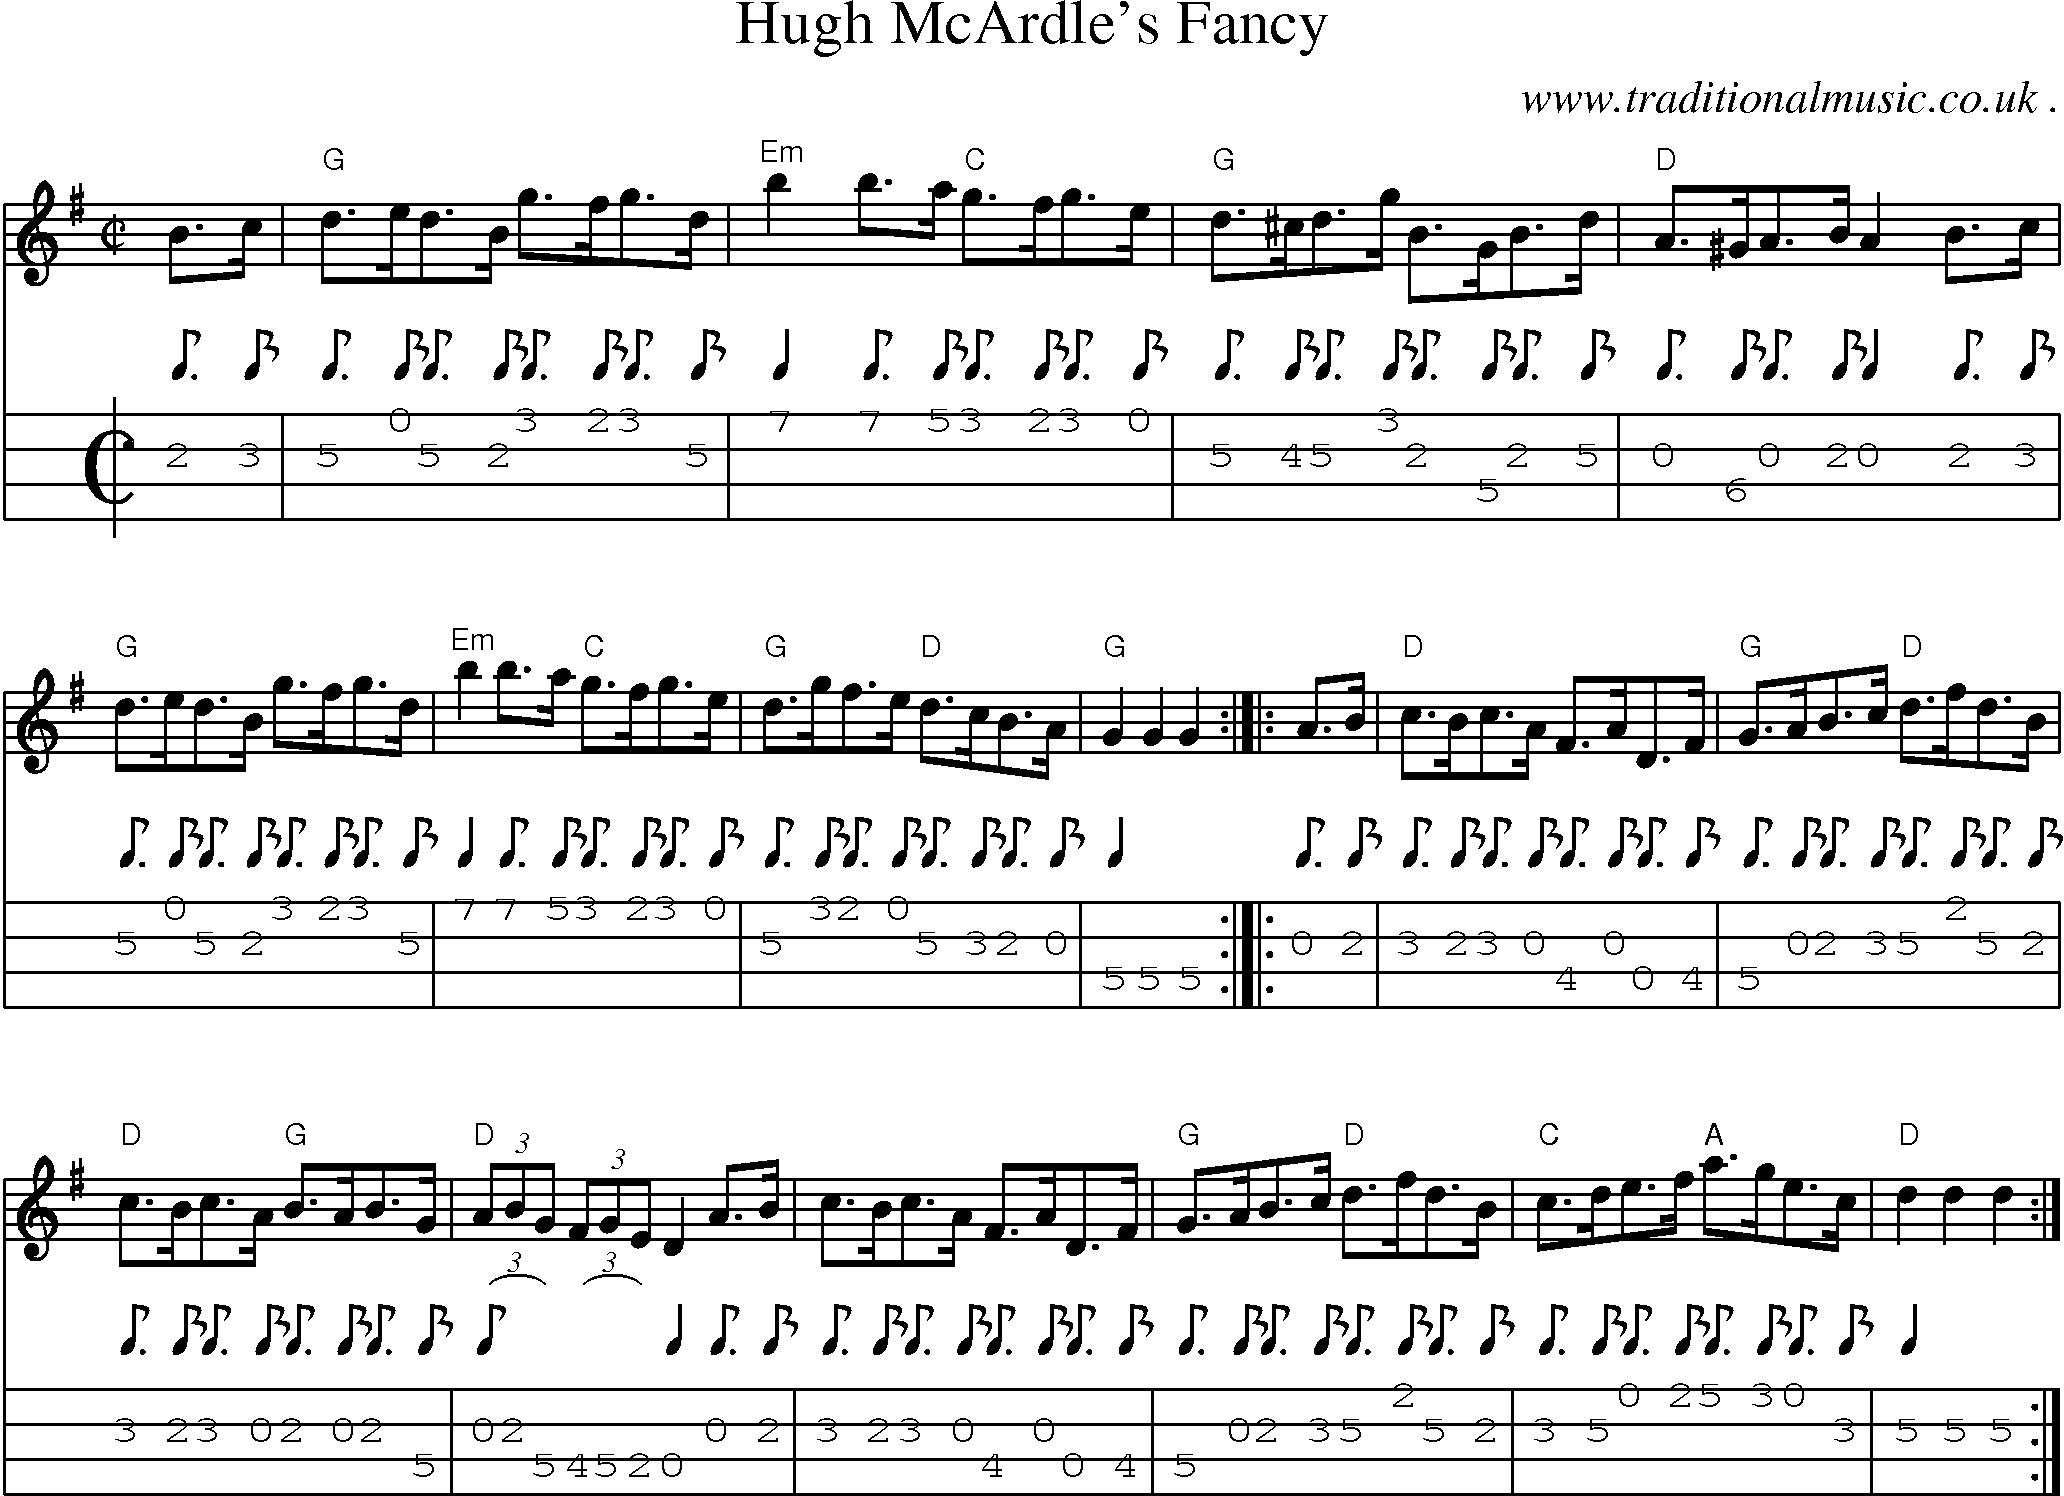 Music Score and Guitar Tabs for Hugh Mcardles Fancy